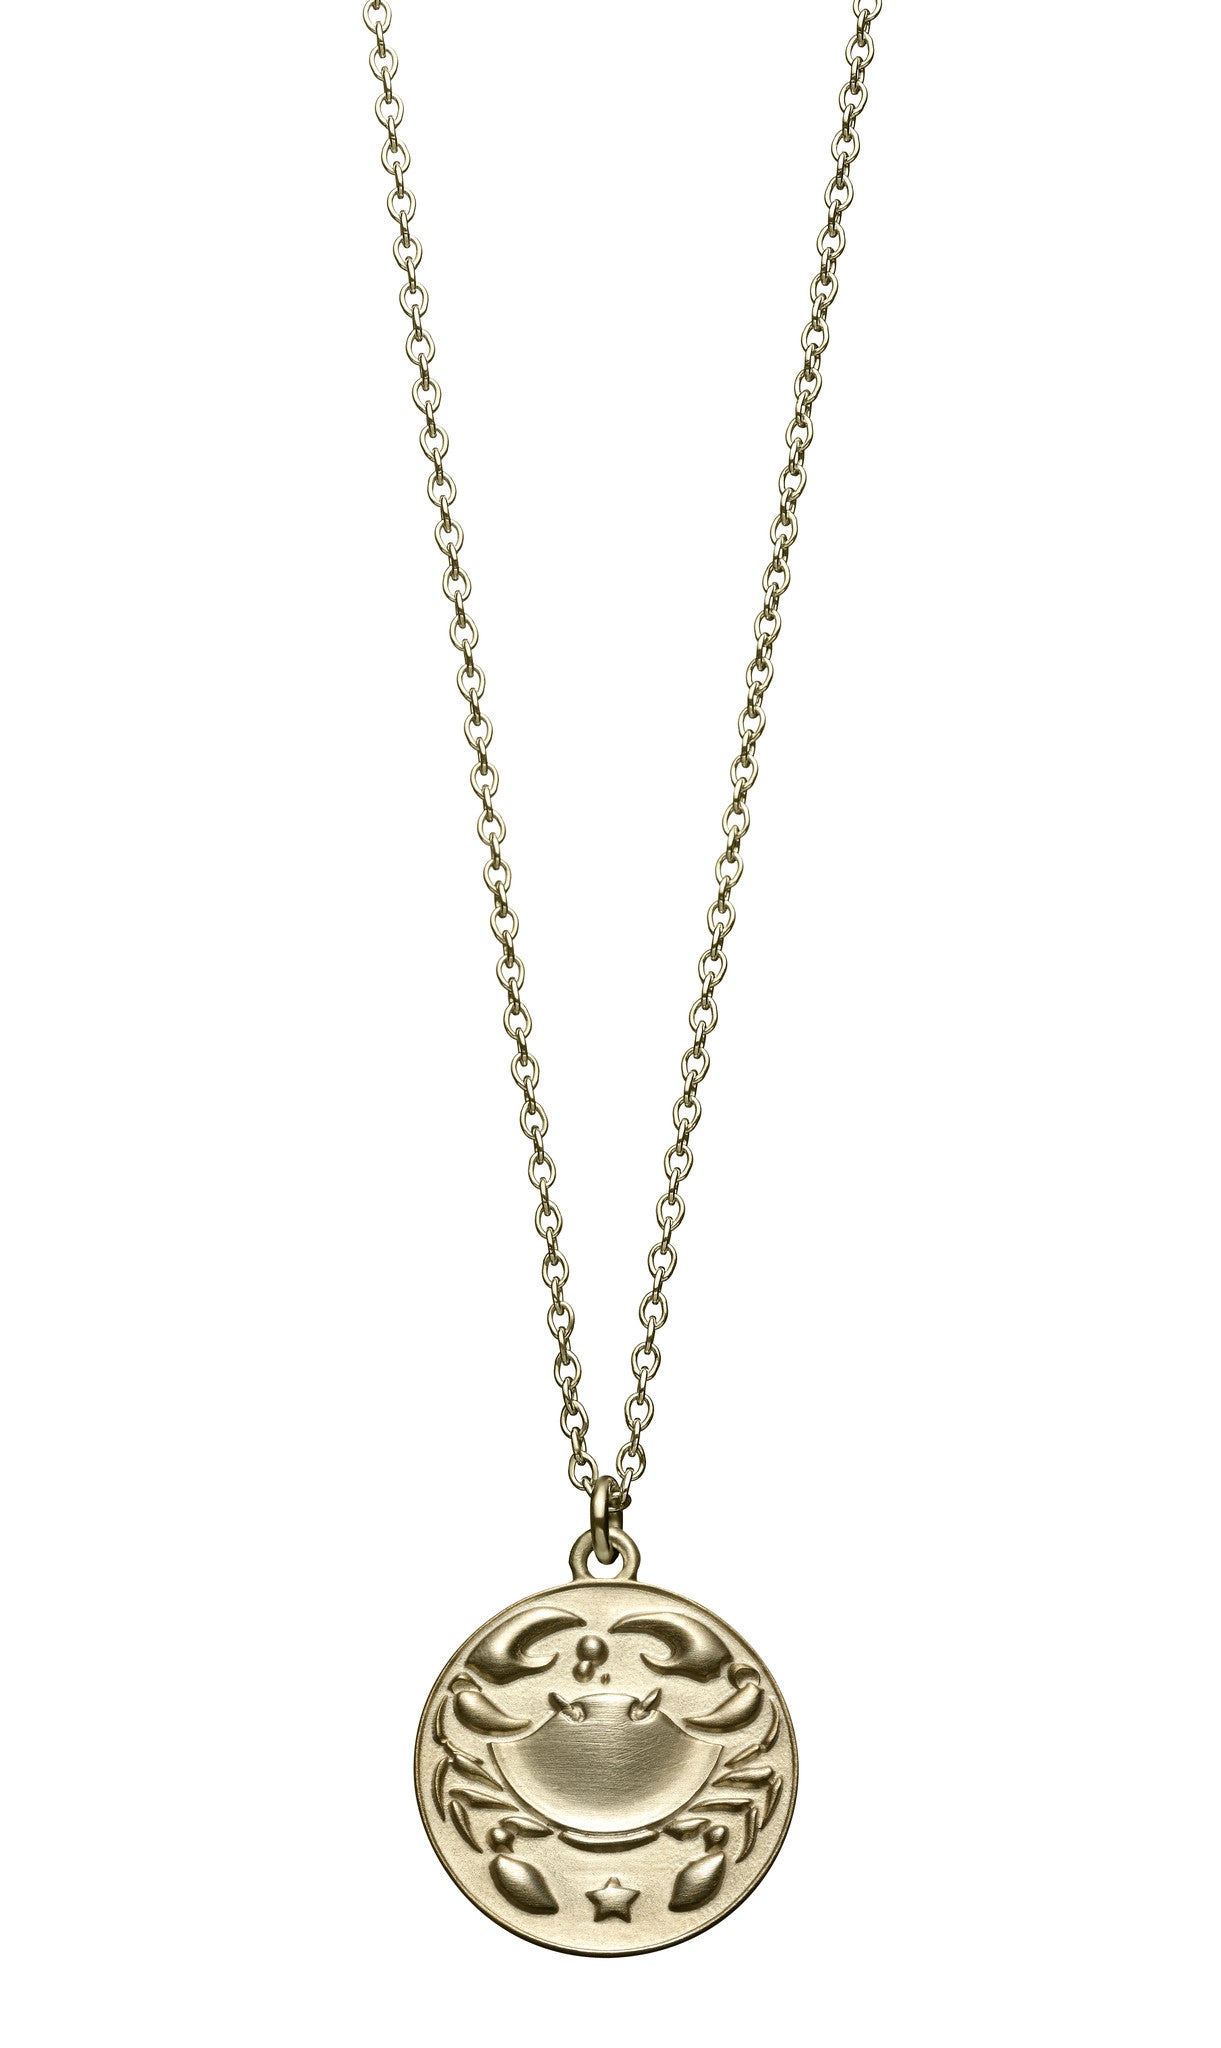 astrology sign cancer vintage 10k gold pendent on long chain necklace by finn by candice pool neistat